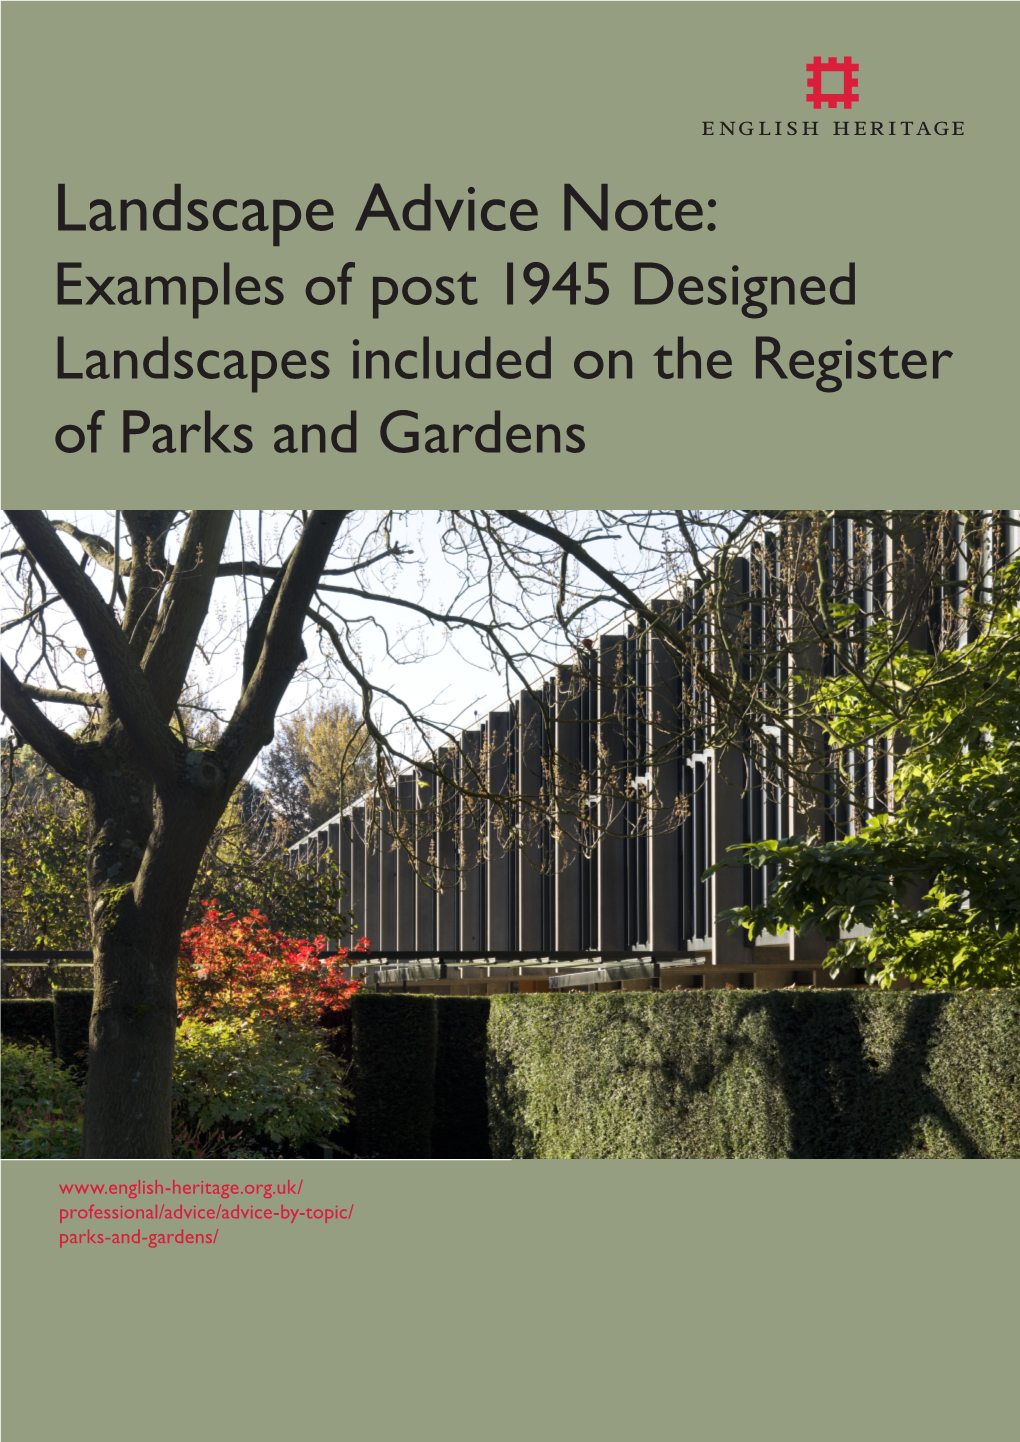 Examples of Post 1945 Designed Landscapes Included on the Register of Parks and Gardens